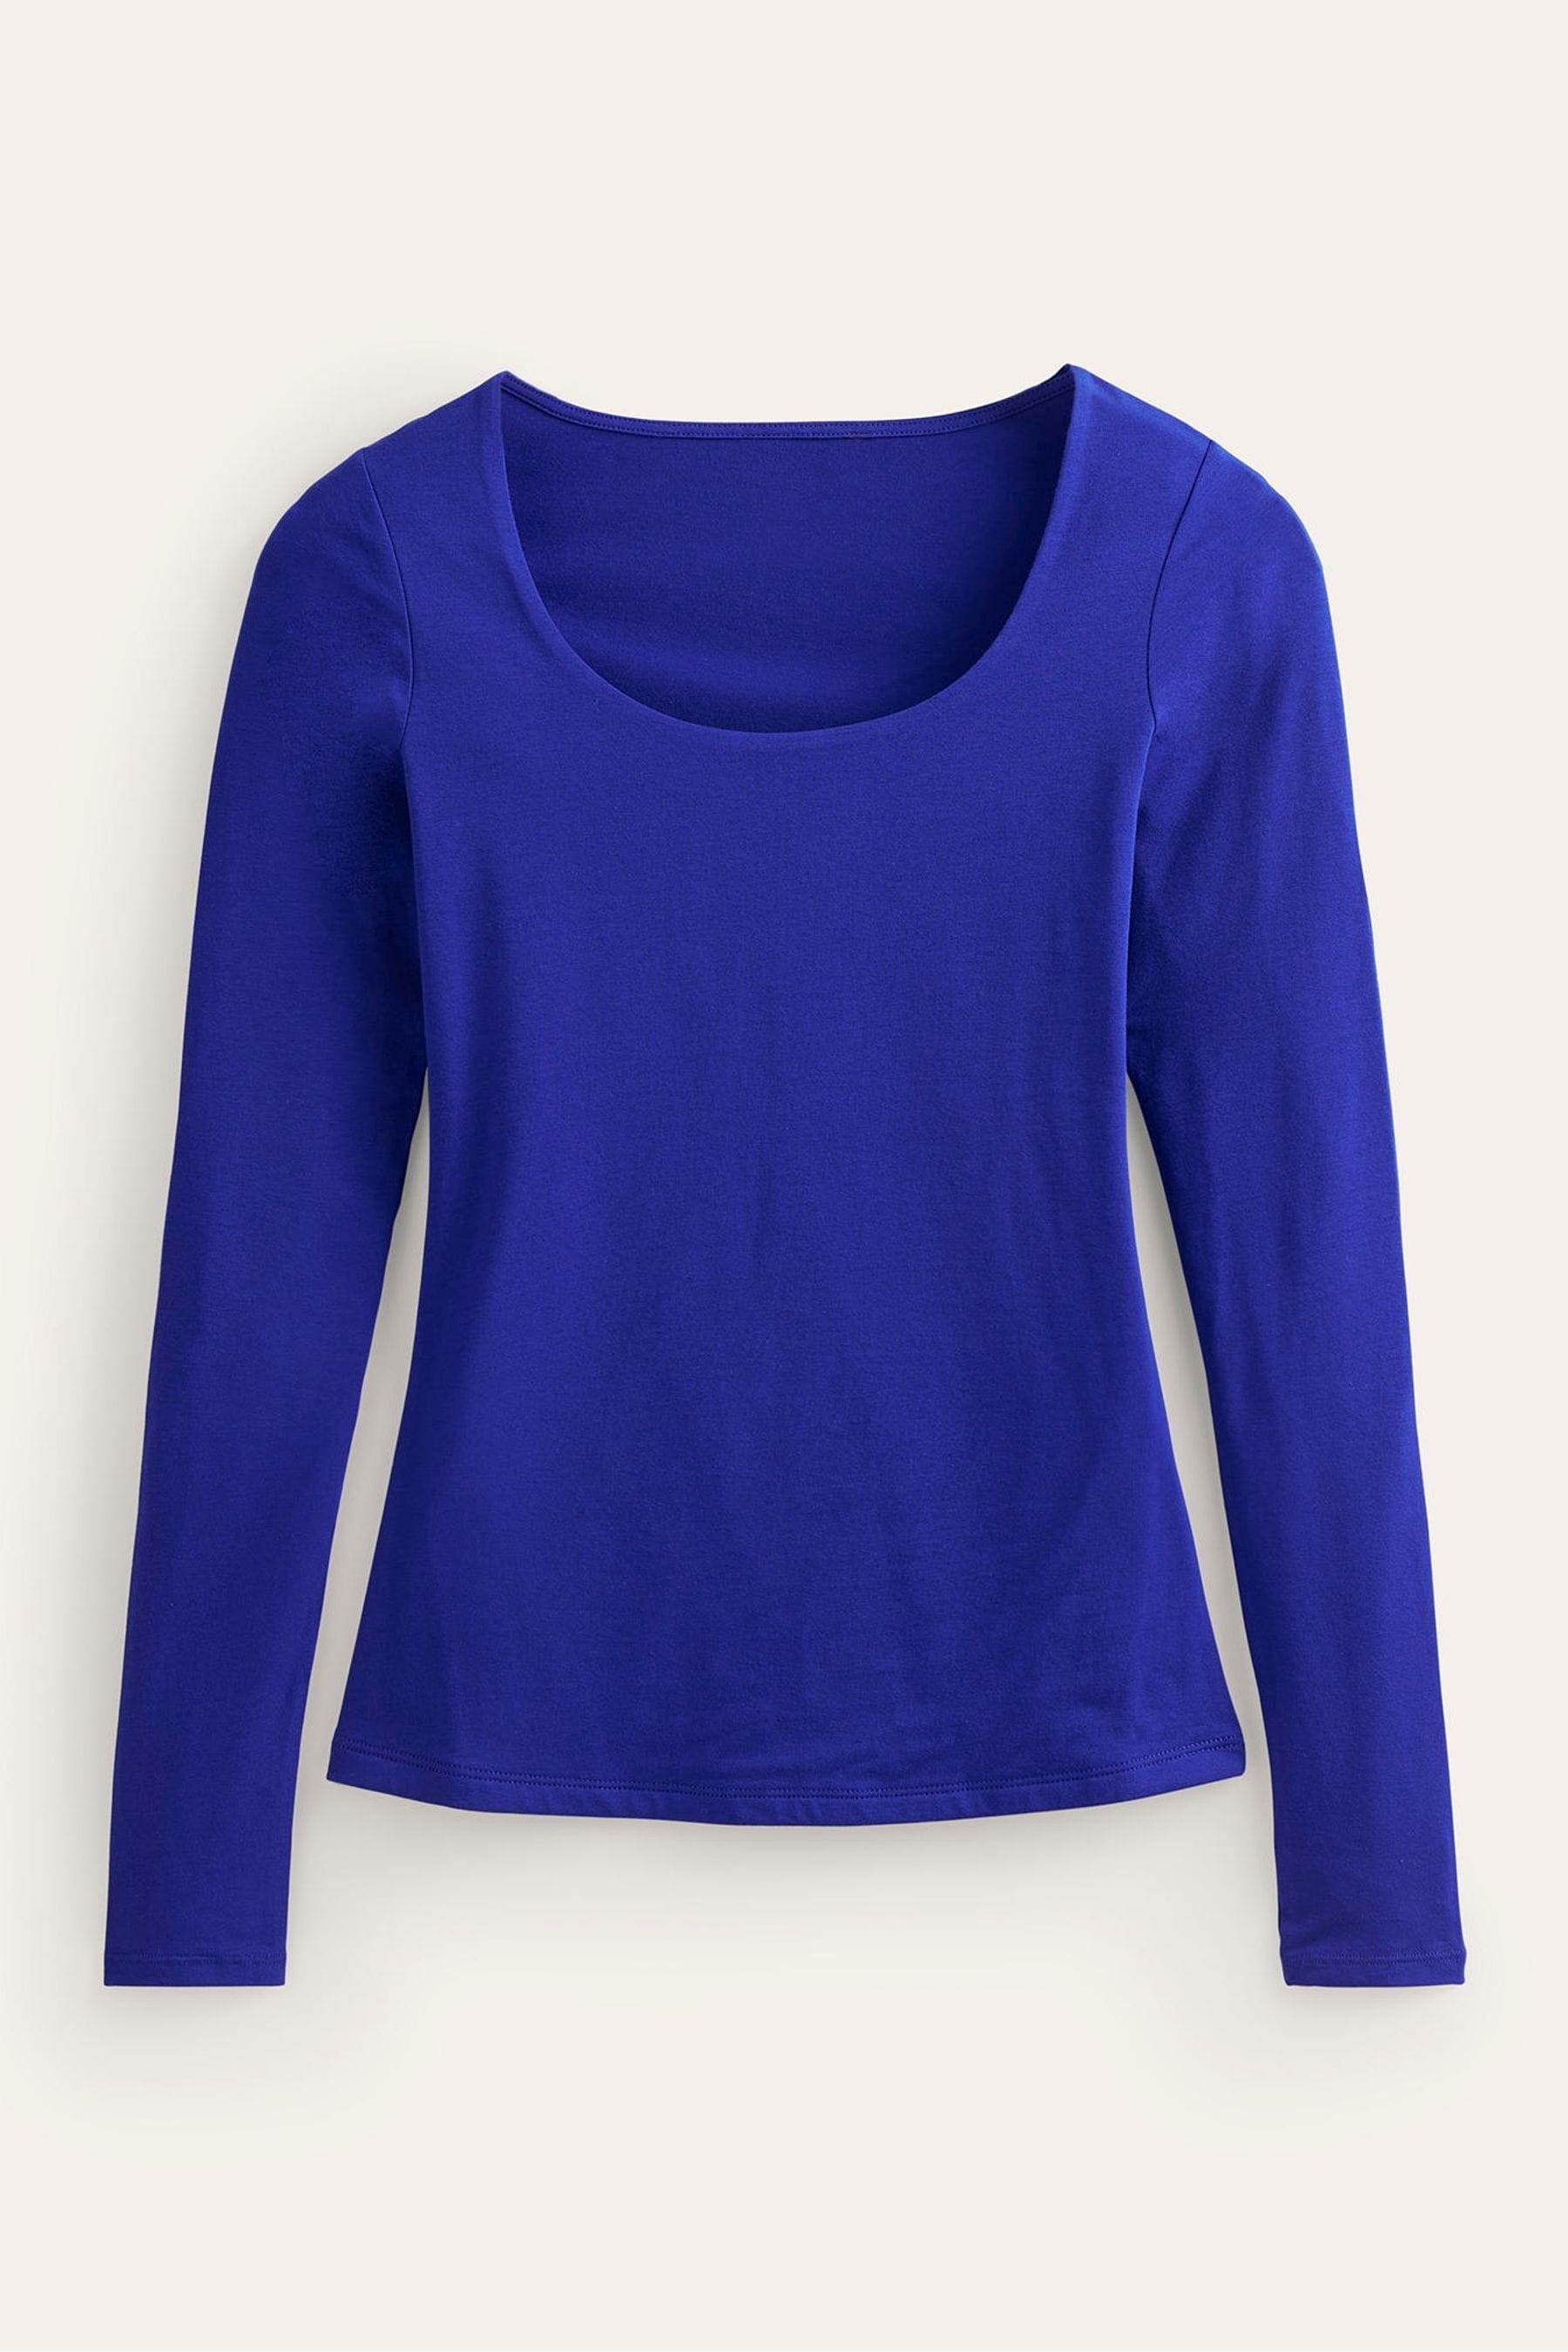 Buy Boden Blue Double Layer Scoop Neck Long Sleeve T-Shirt from the ...